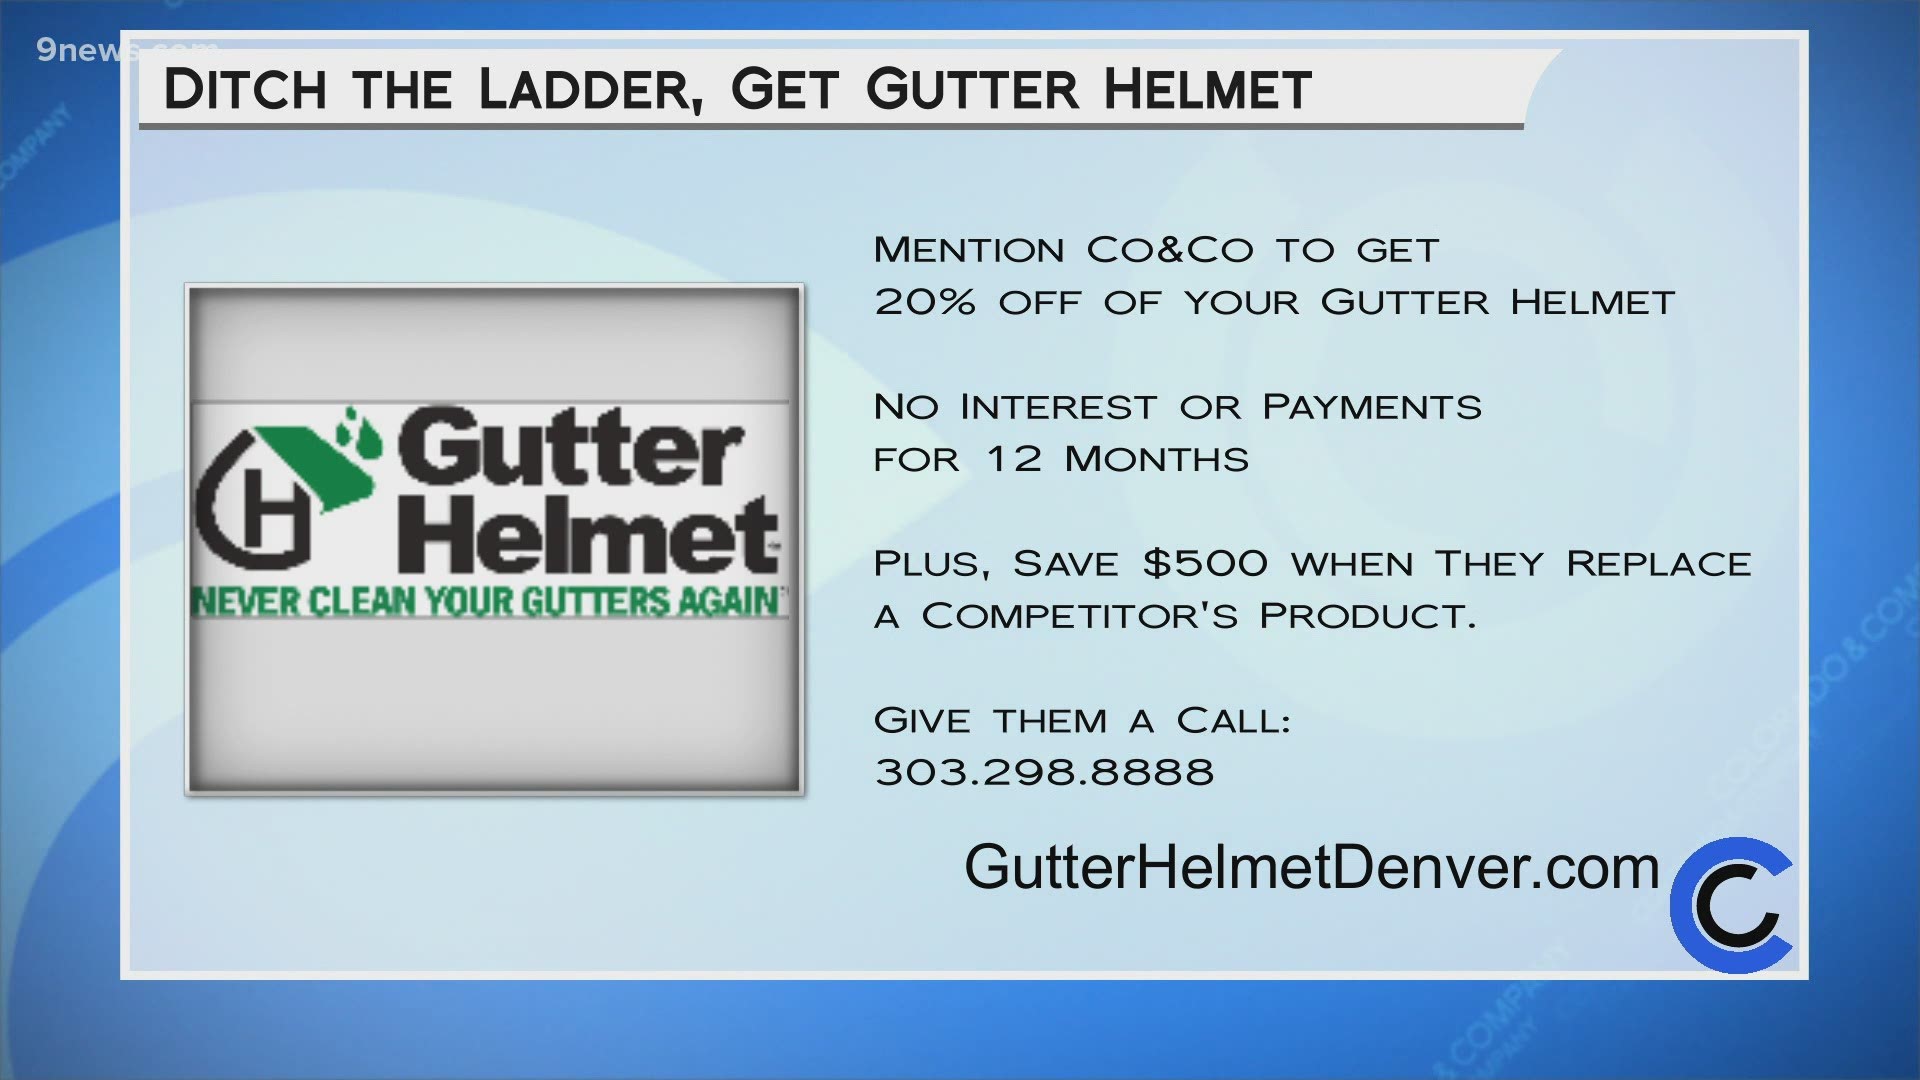 Call 303.298.8888 today and get 20% off, no payments and no interest for 12 months! Learn more at GutterHelmetDenver.com.